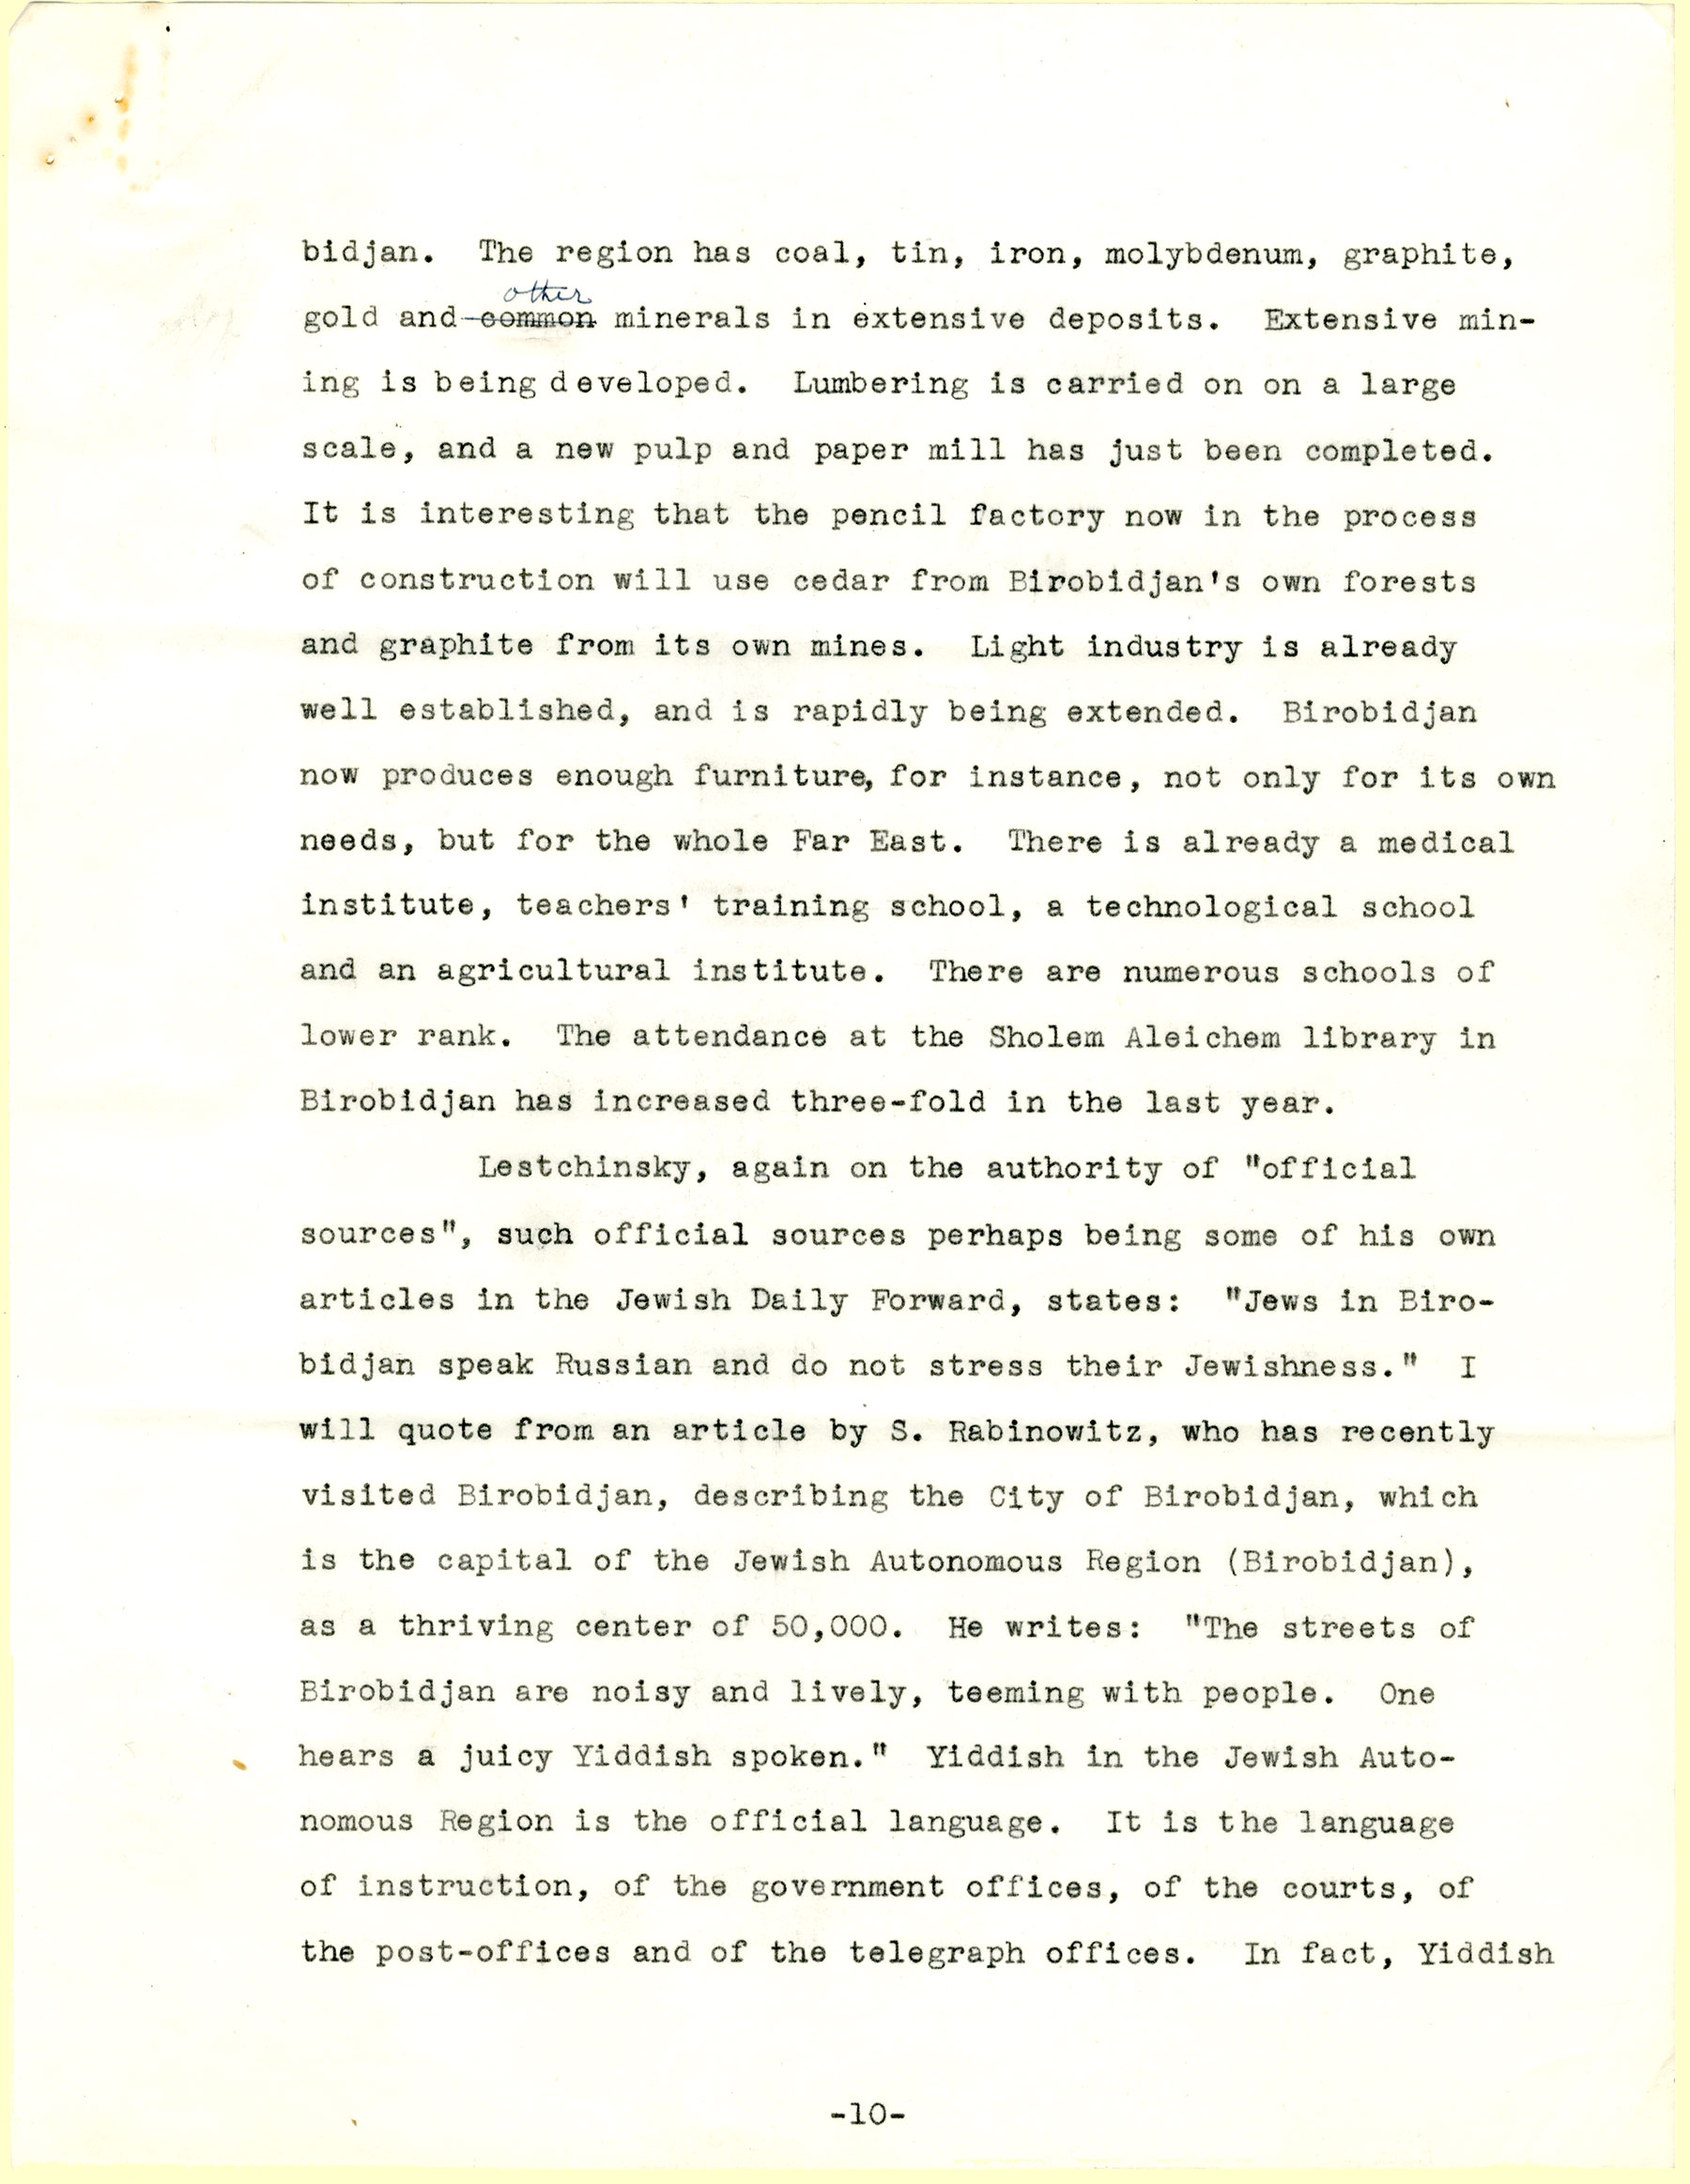 B.Z. Goldberg's letter to The New Palestine, page 10